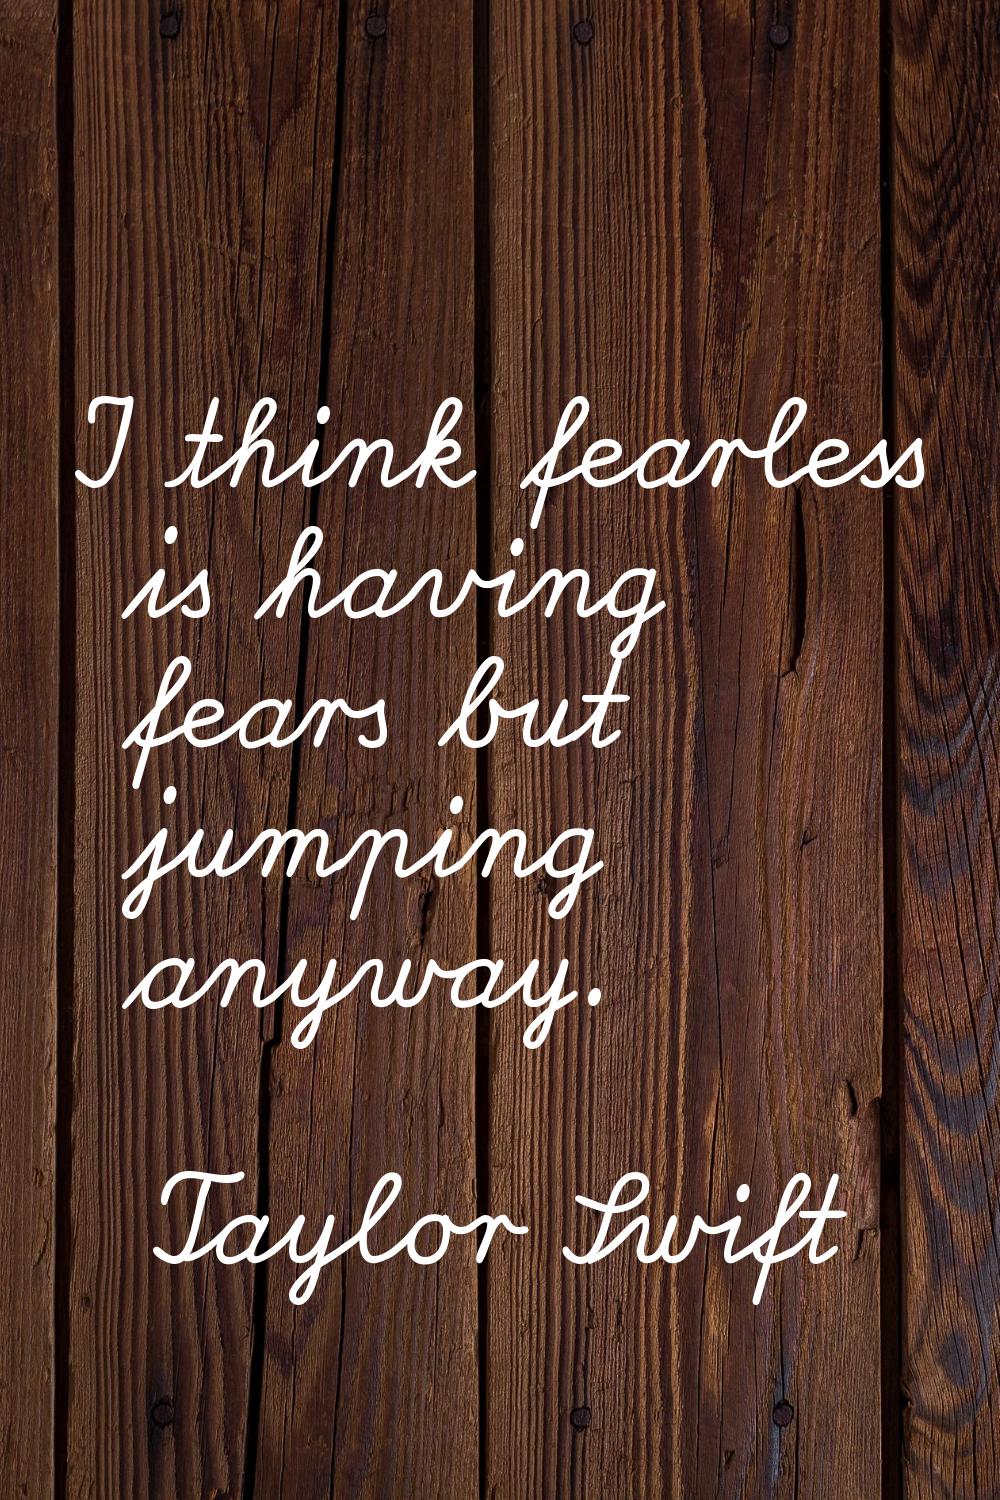 I think fearless is having fears but jumping anyway.